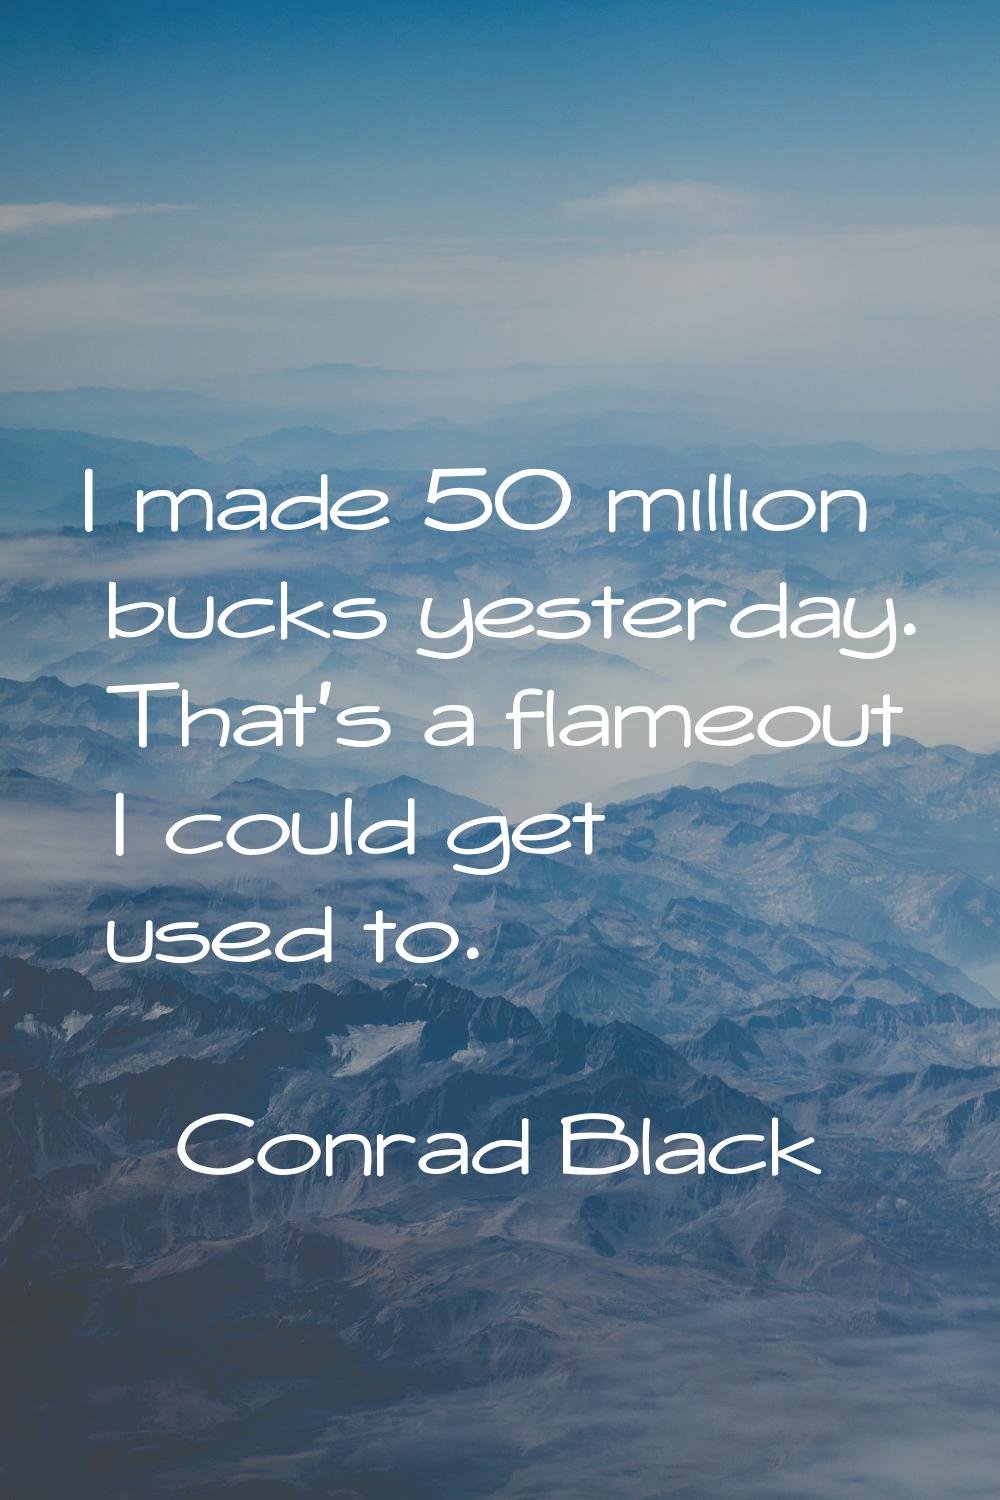 I made 50 million bucks yesterday. That's a flameout I could get used to.